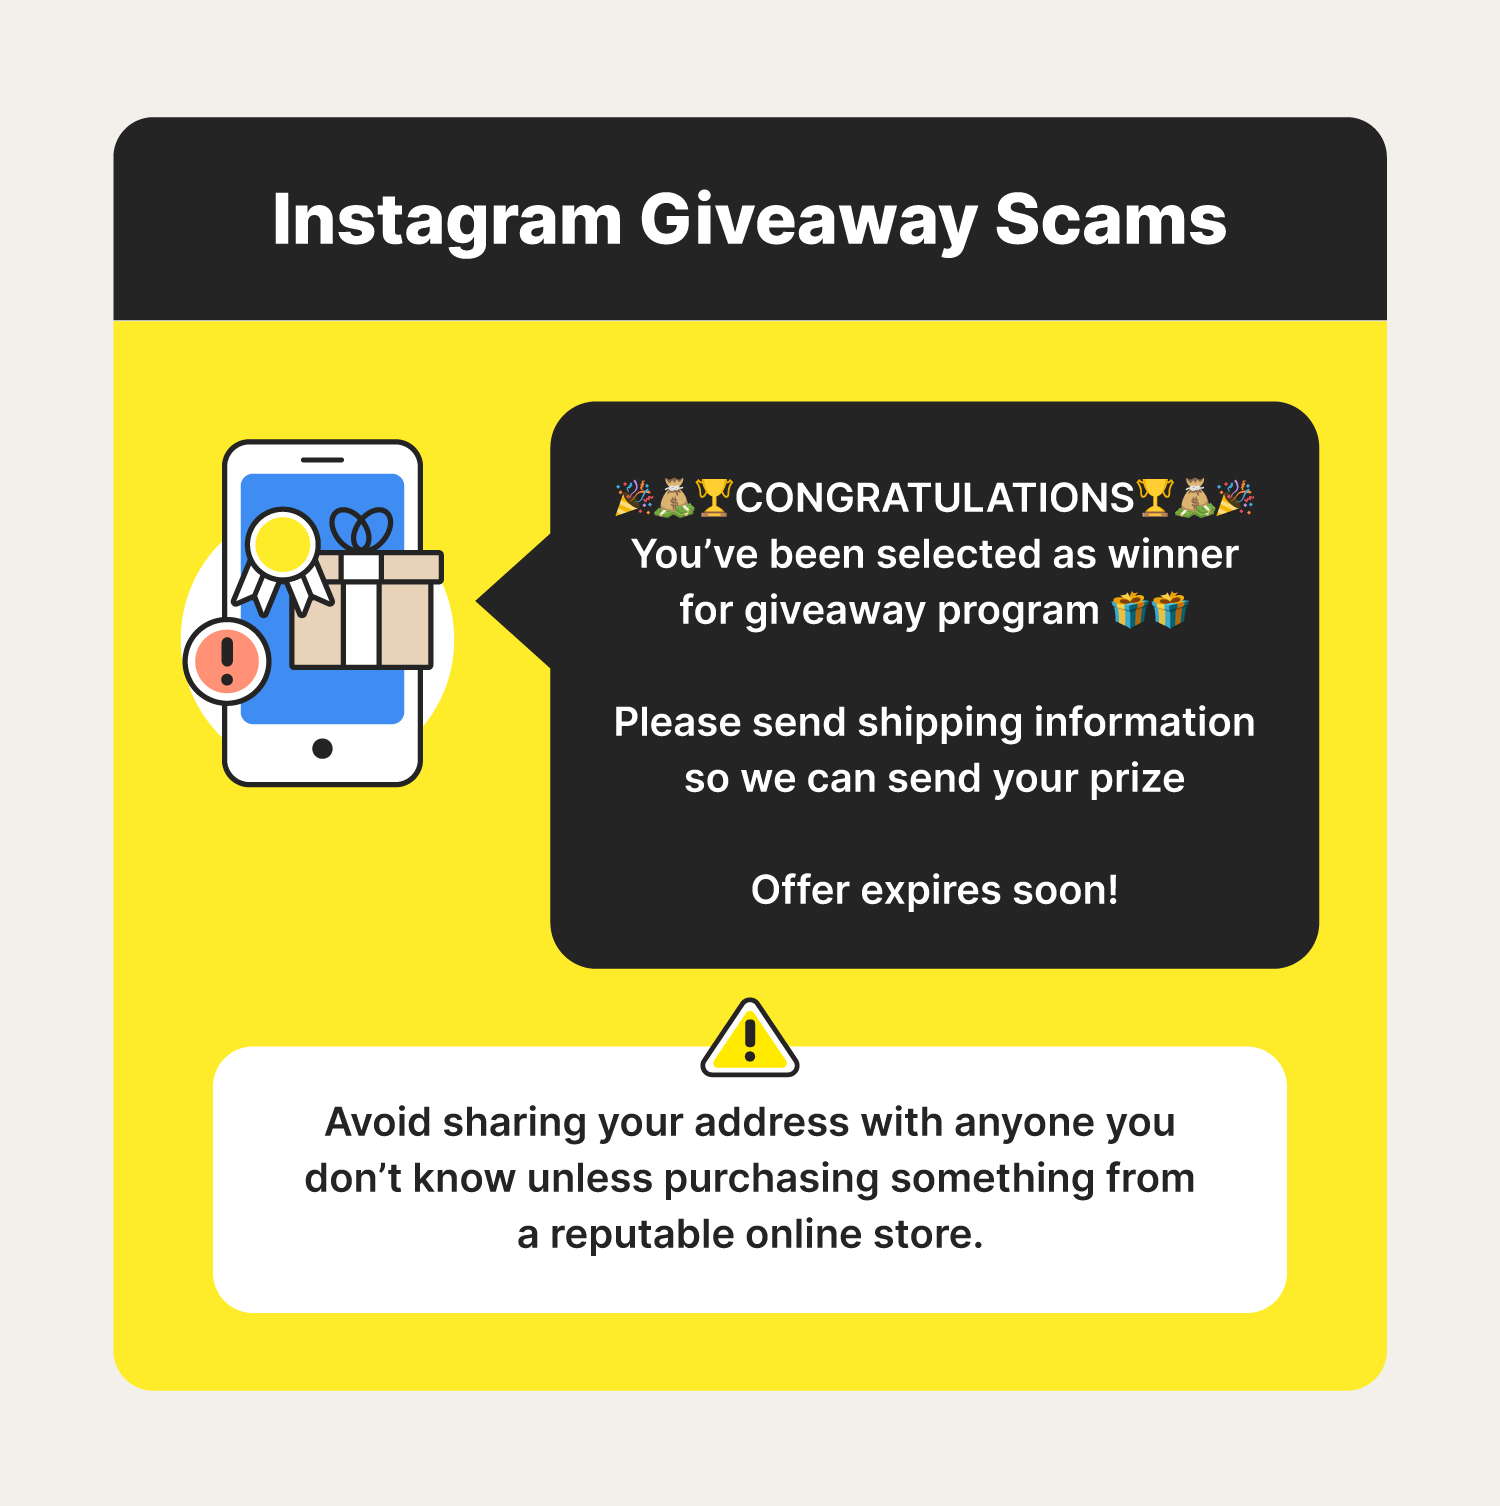 A graphic showcases a direct message promoting a fake giveaway, a common Instagram scam. 